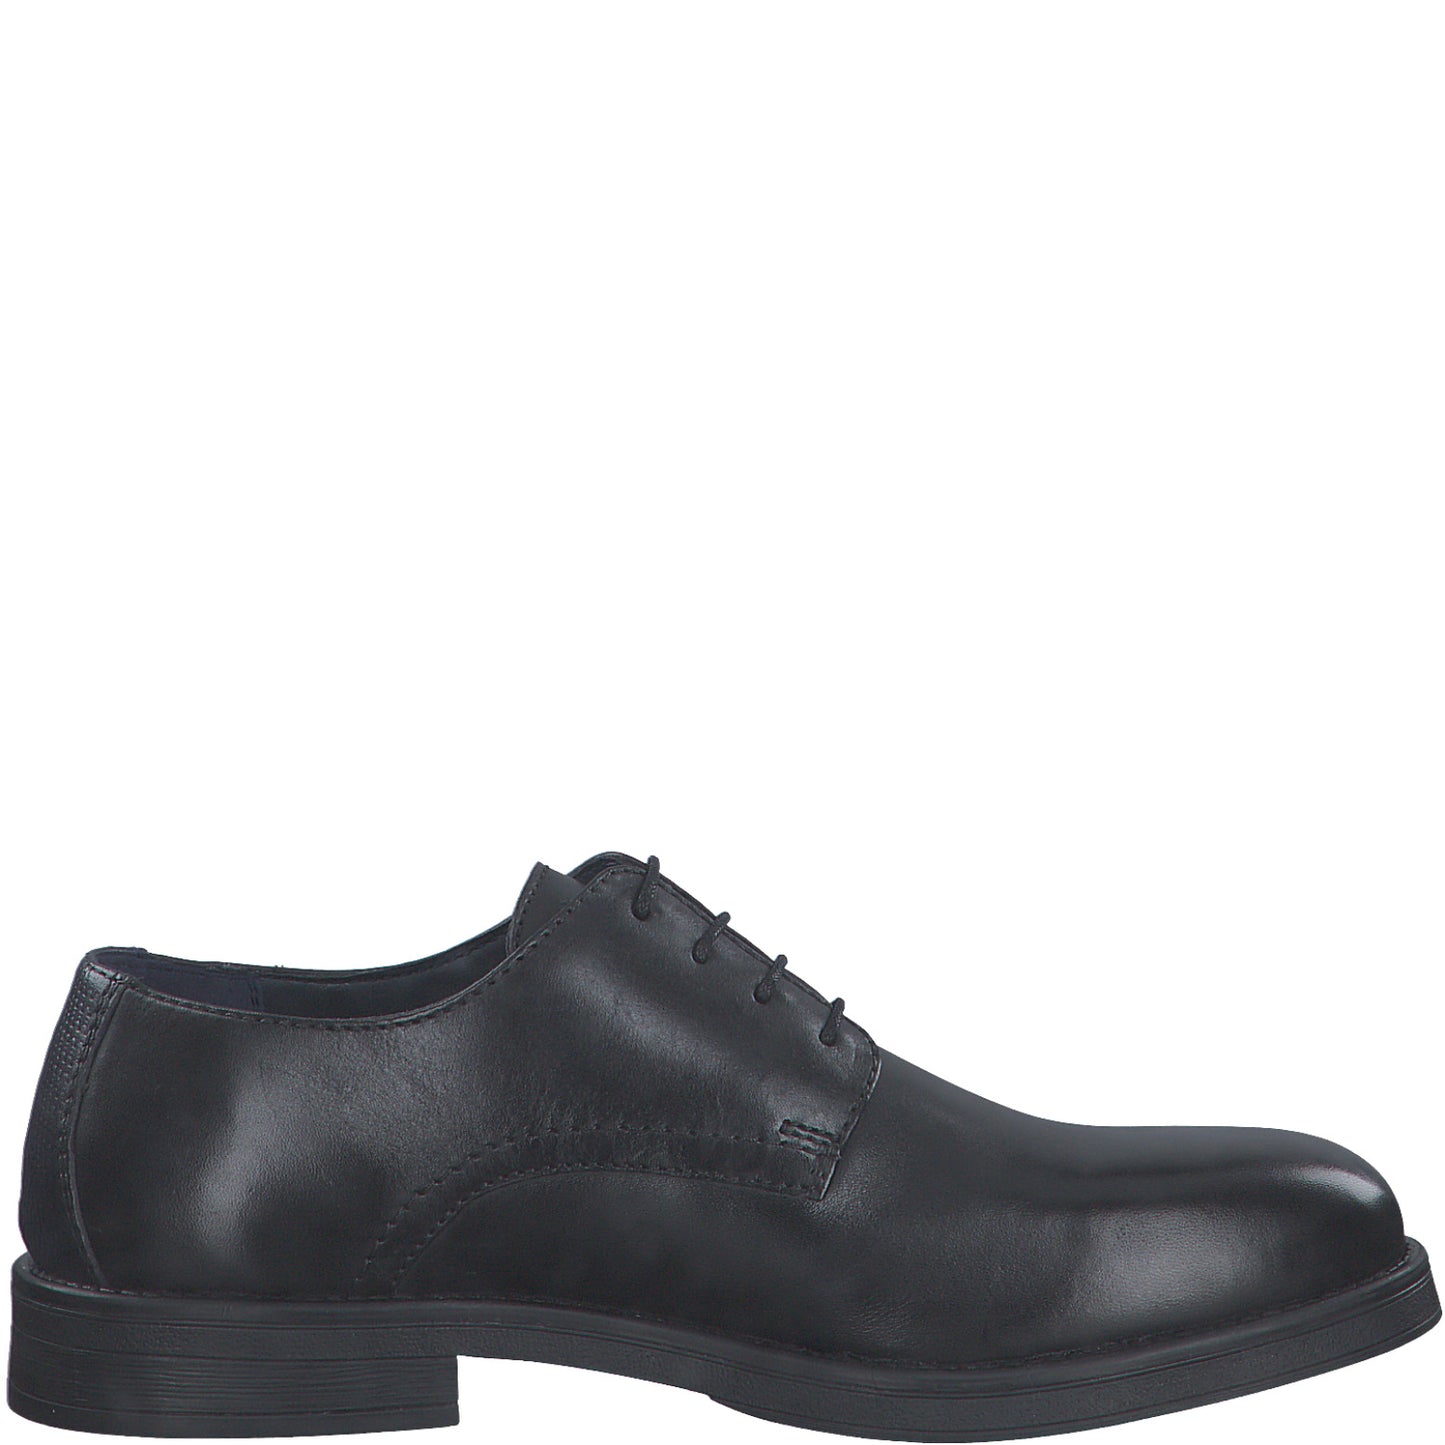 S Oliver 5-5-13200-39 001 Black Casual Shoes